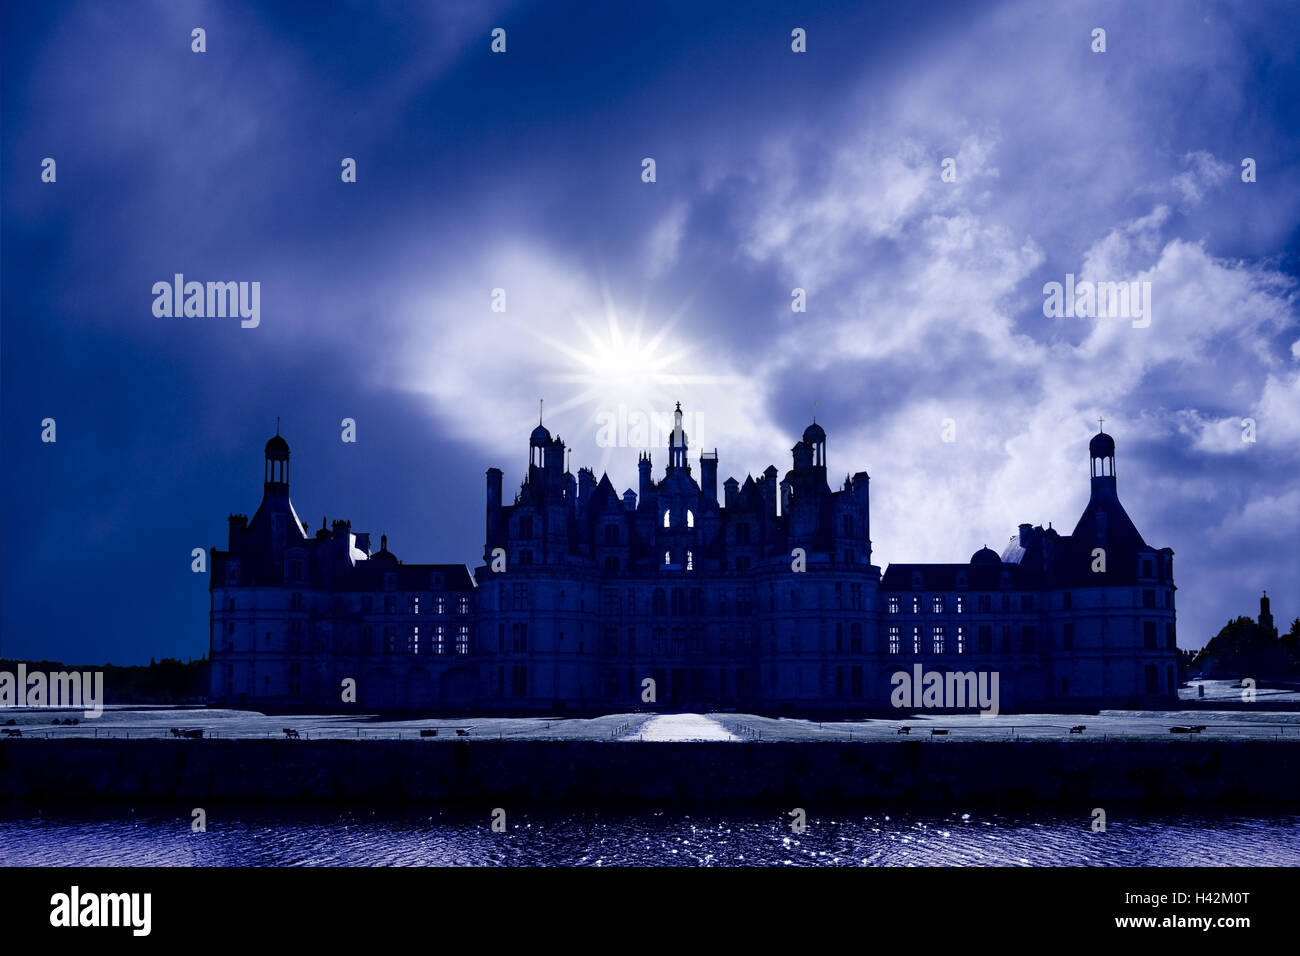 France, Loire, castle Chambord, cloudy sky, spectral filter blue, Stock Photo